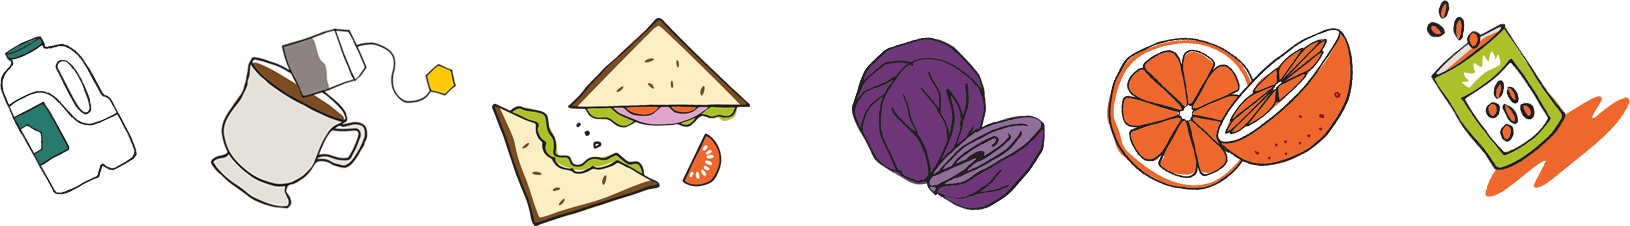 dishes clipart purple food